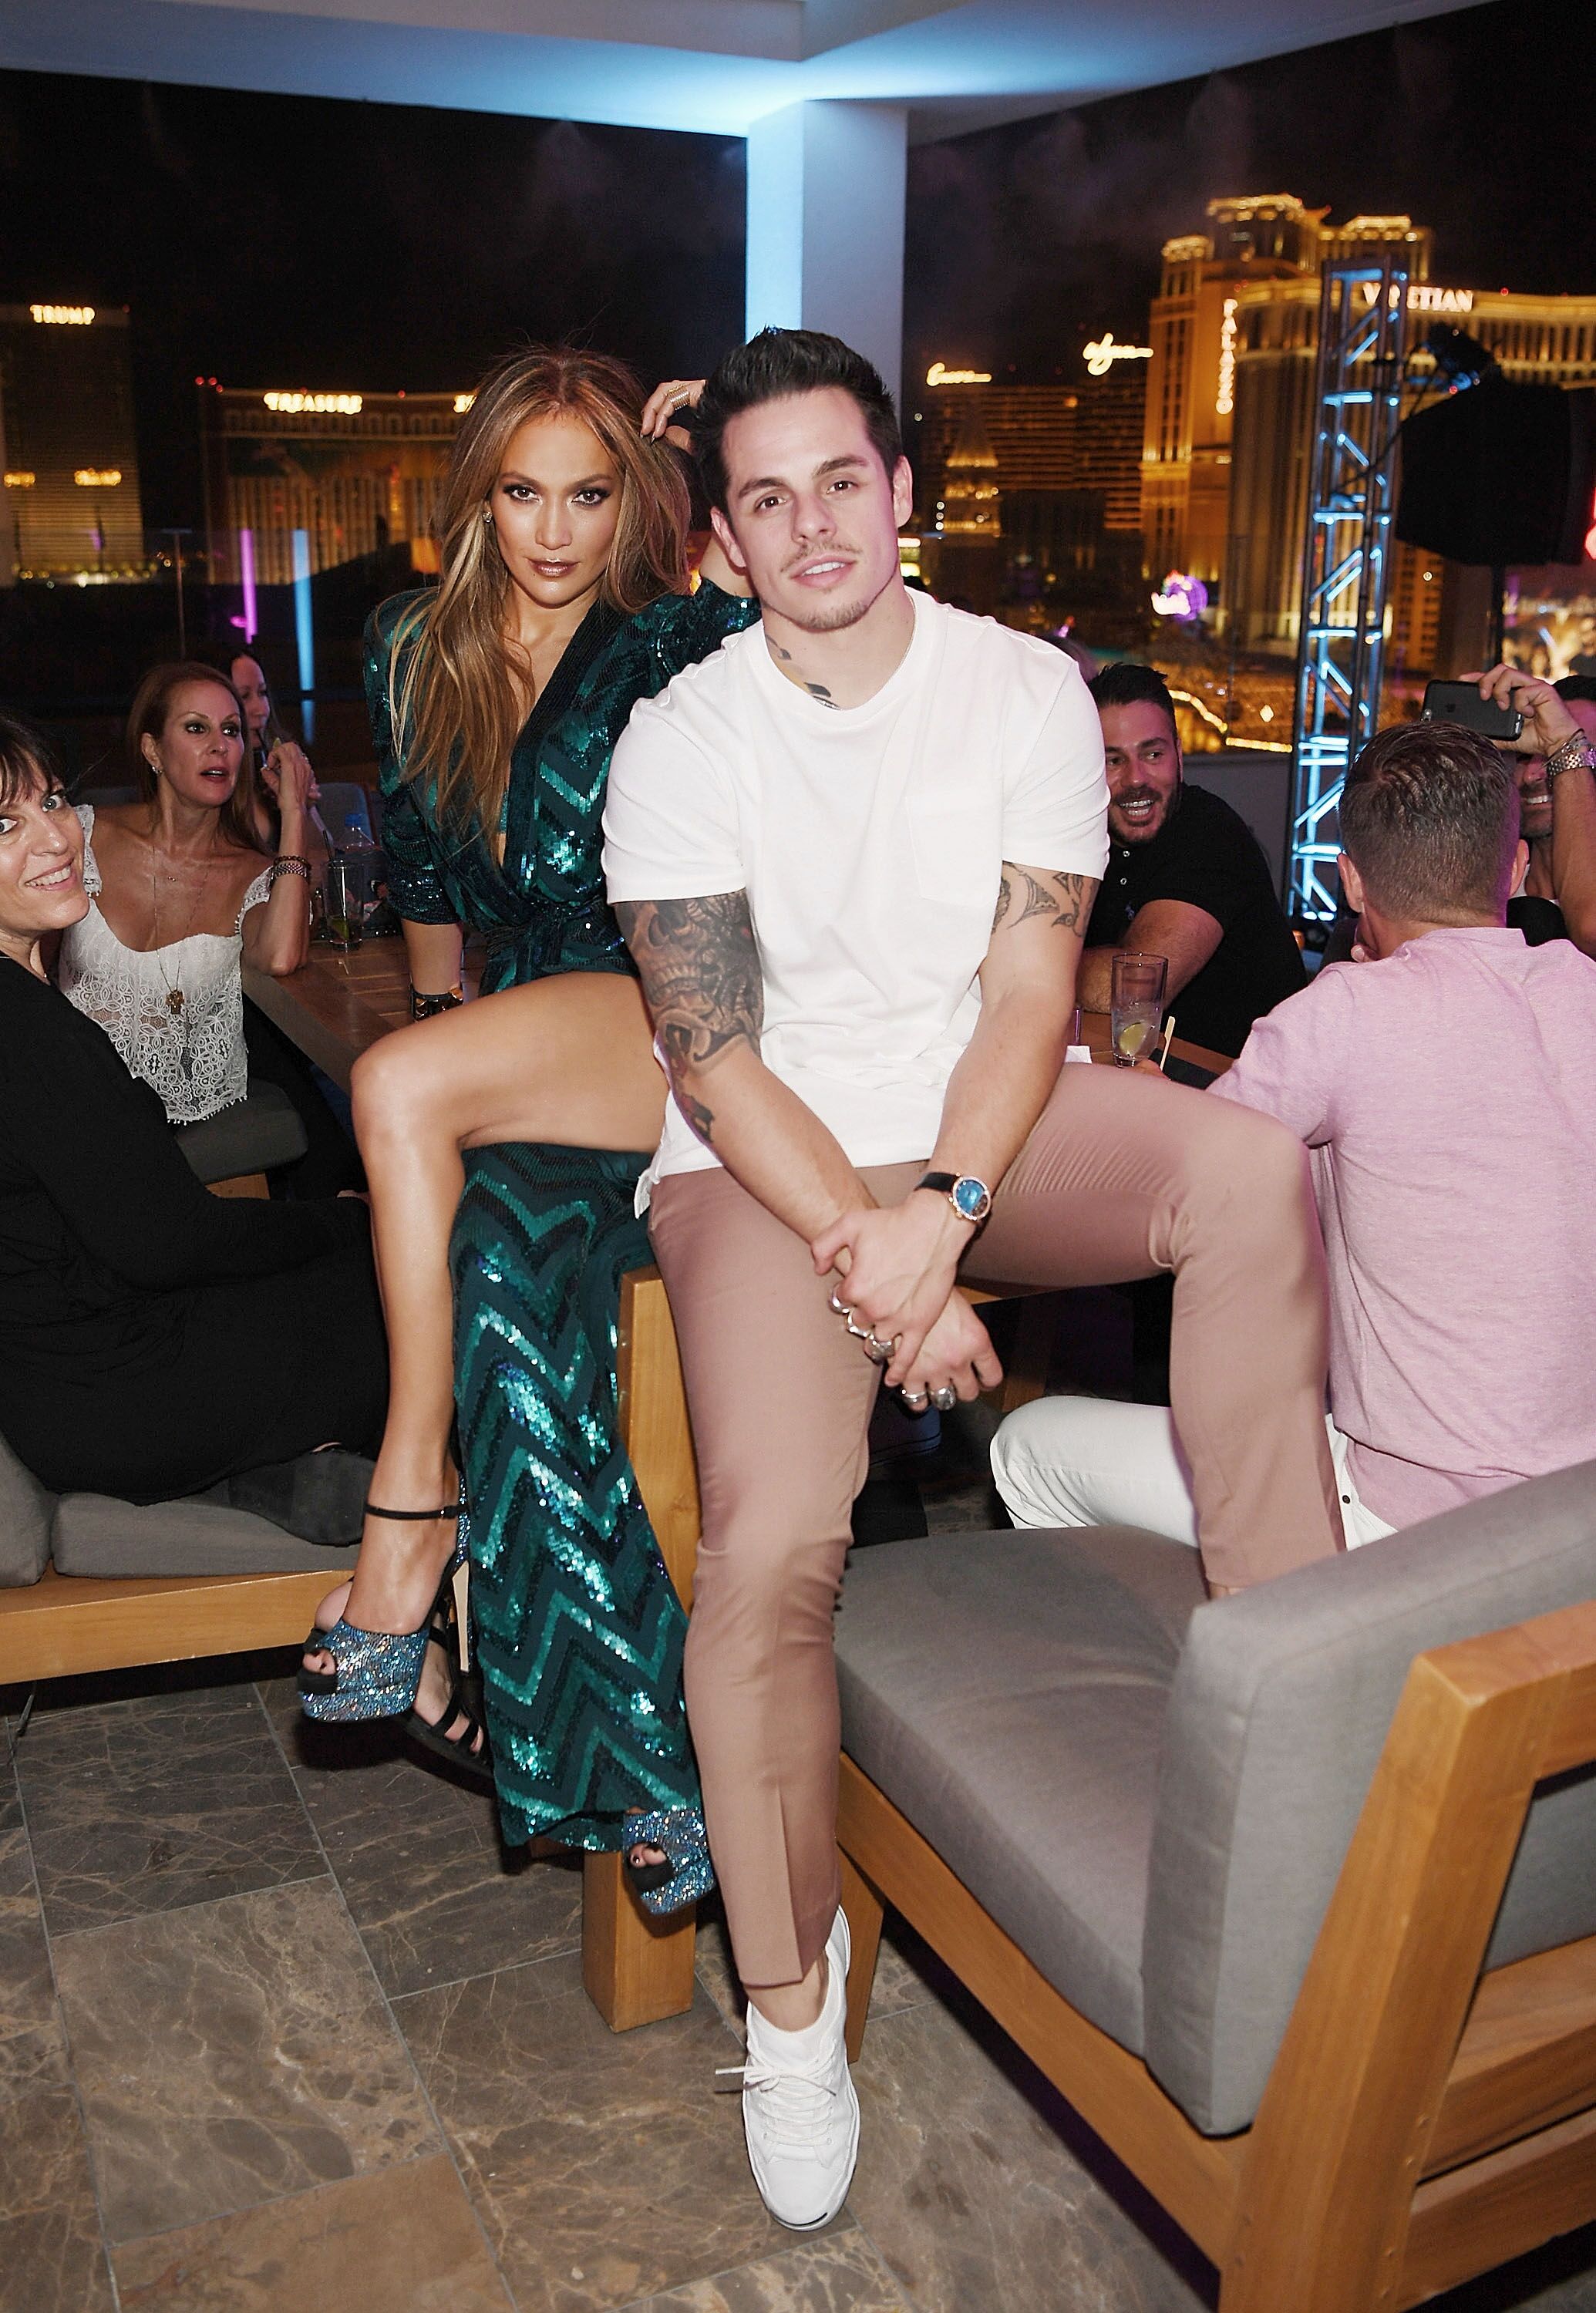 Jennifer Lopez and Casper Smart at Caesars Palace in 2016 in Las Vegas | Photo: Getty Images